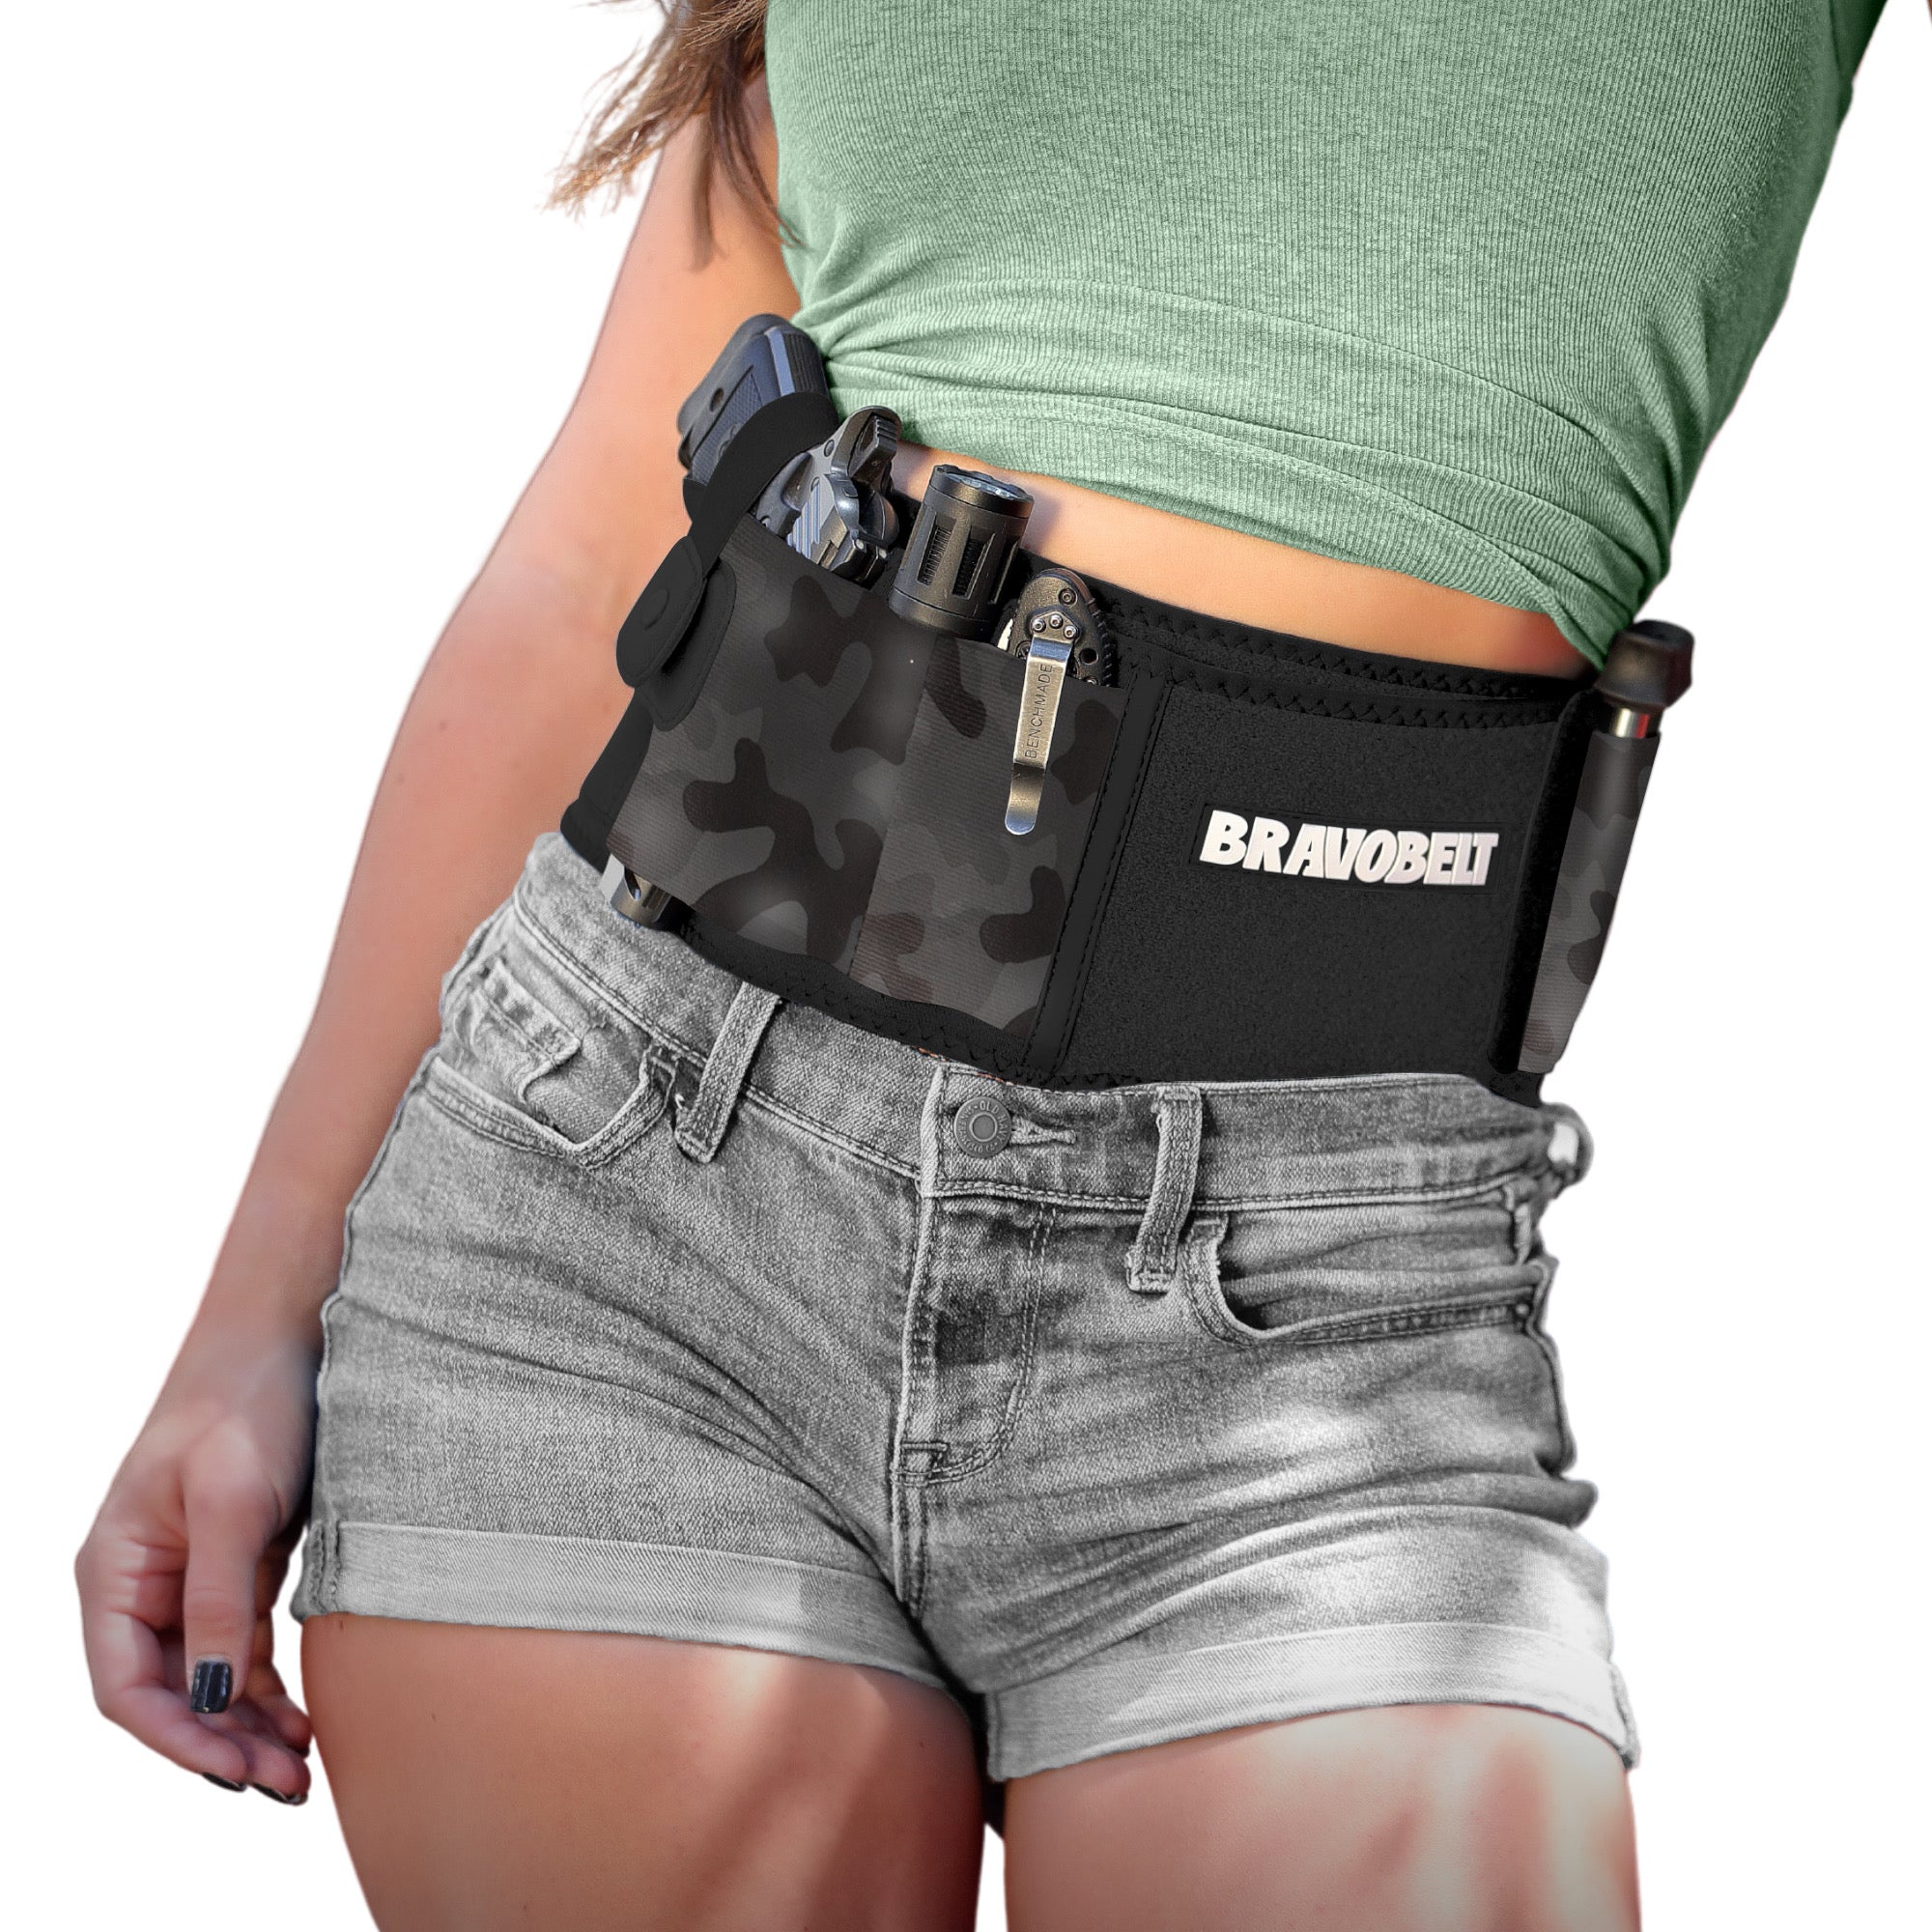 BravoBelt Belly Band Holster for Concealed Carry - Unisex - Camo